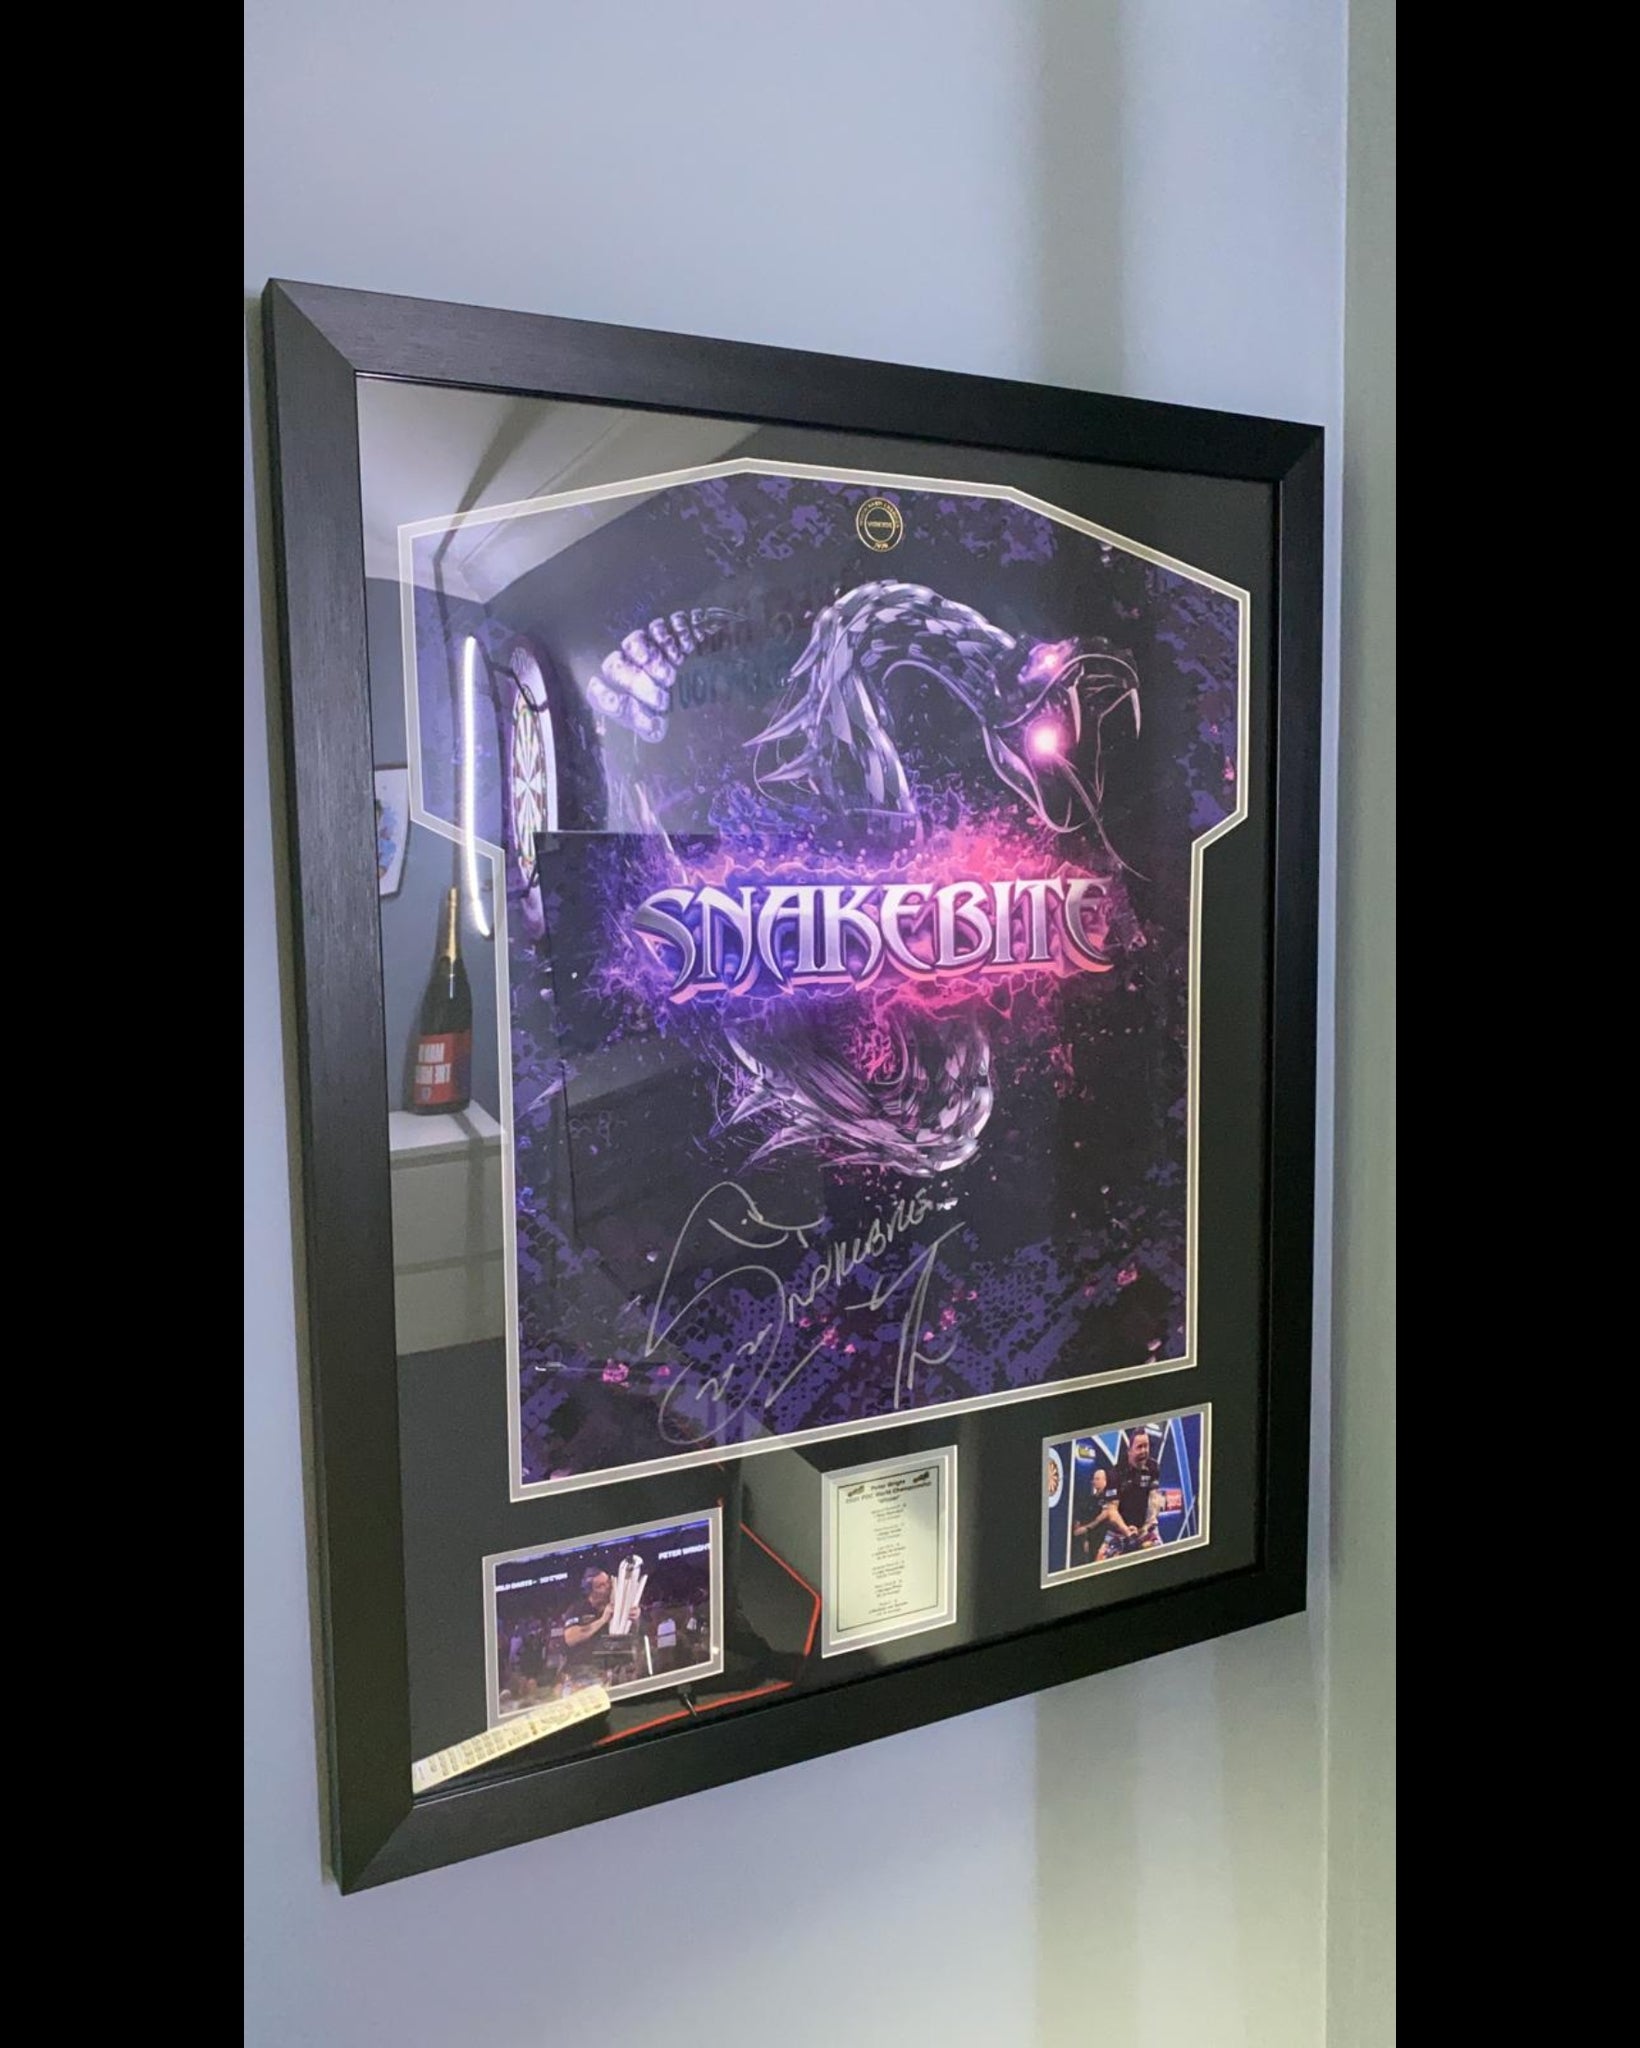 Framed limited edition snakebite playing shirts, was made for the 2022 season but due to change in sponsor with winning the World Championship 2022 we had to order new ones. So a great opportunity to purchase a actual shirt made for Peter.